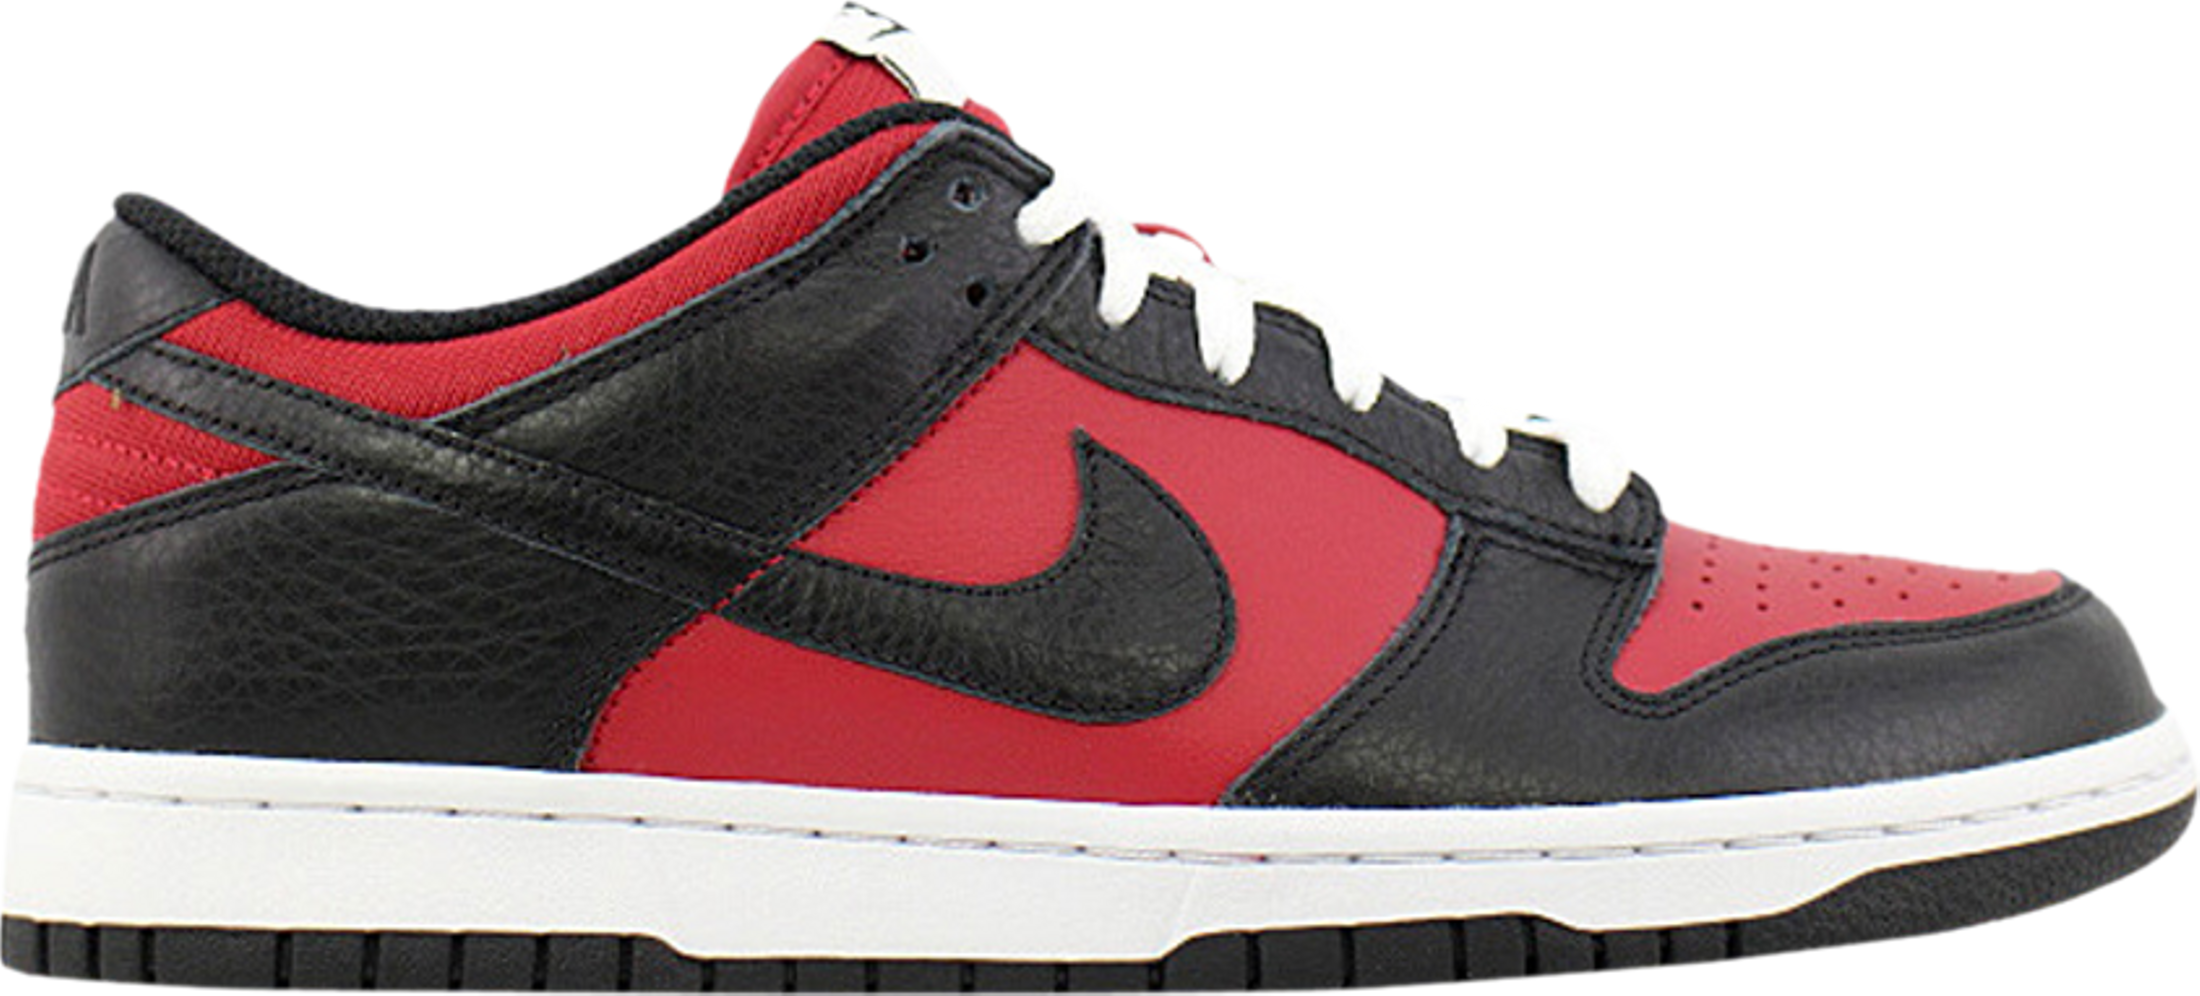 Buy Dunk Low 'Bred' - 318019 601 | GOAT